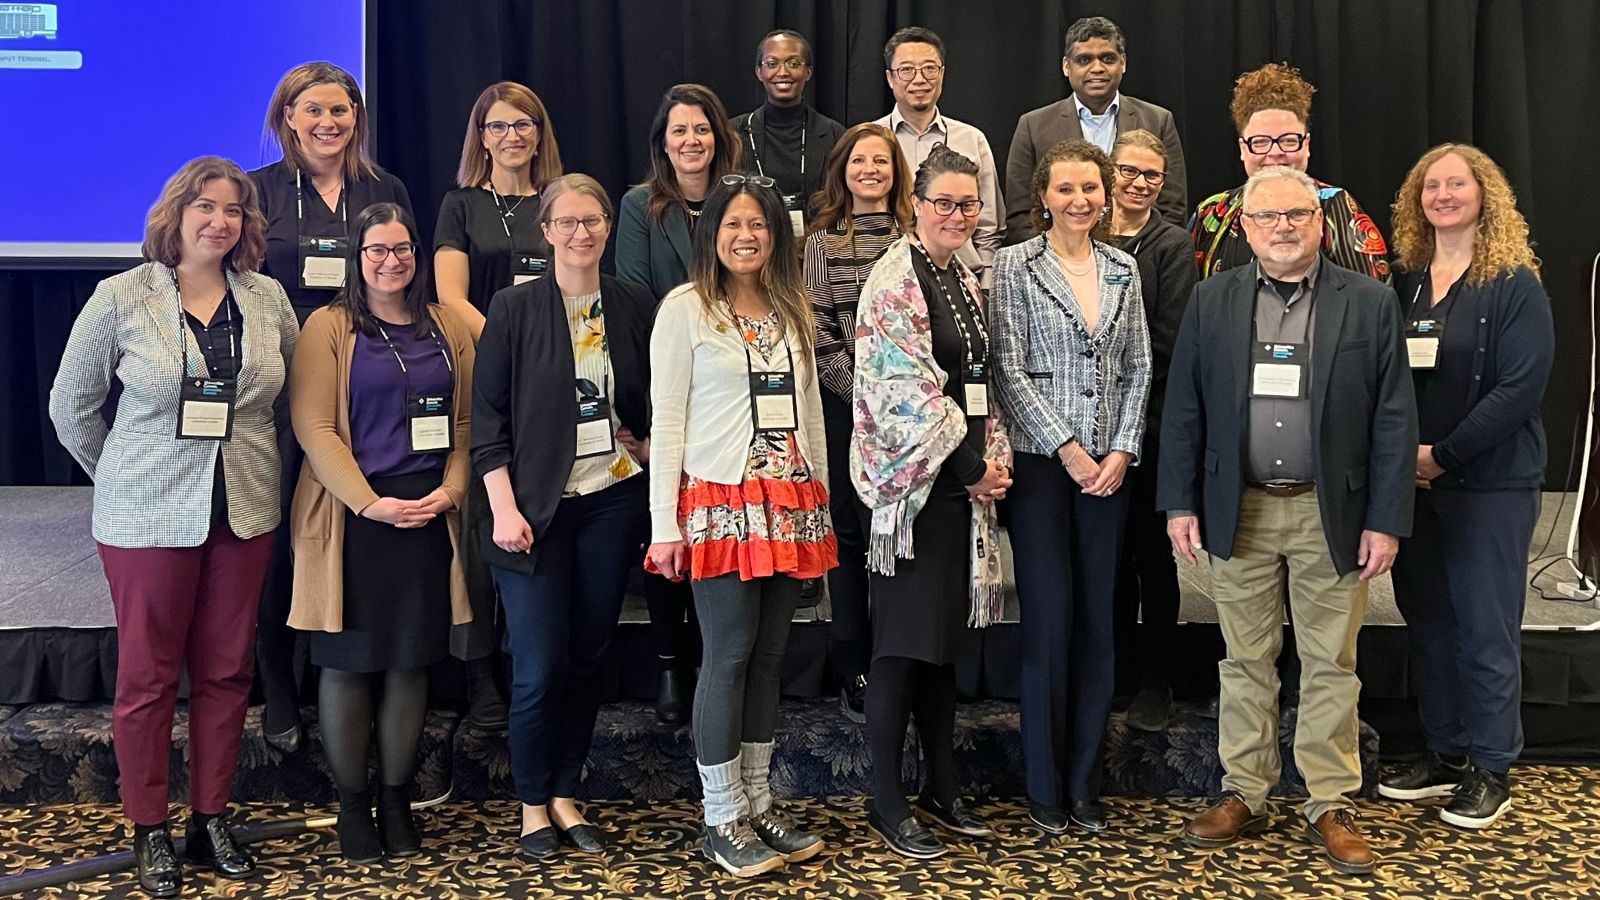 Researchers across the prairie institutions gathered at the U of A to showcase the multifaceted approach universities are taking towards climate change mitigation and adaptation.